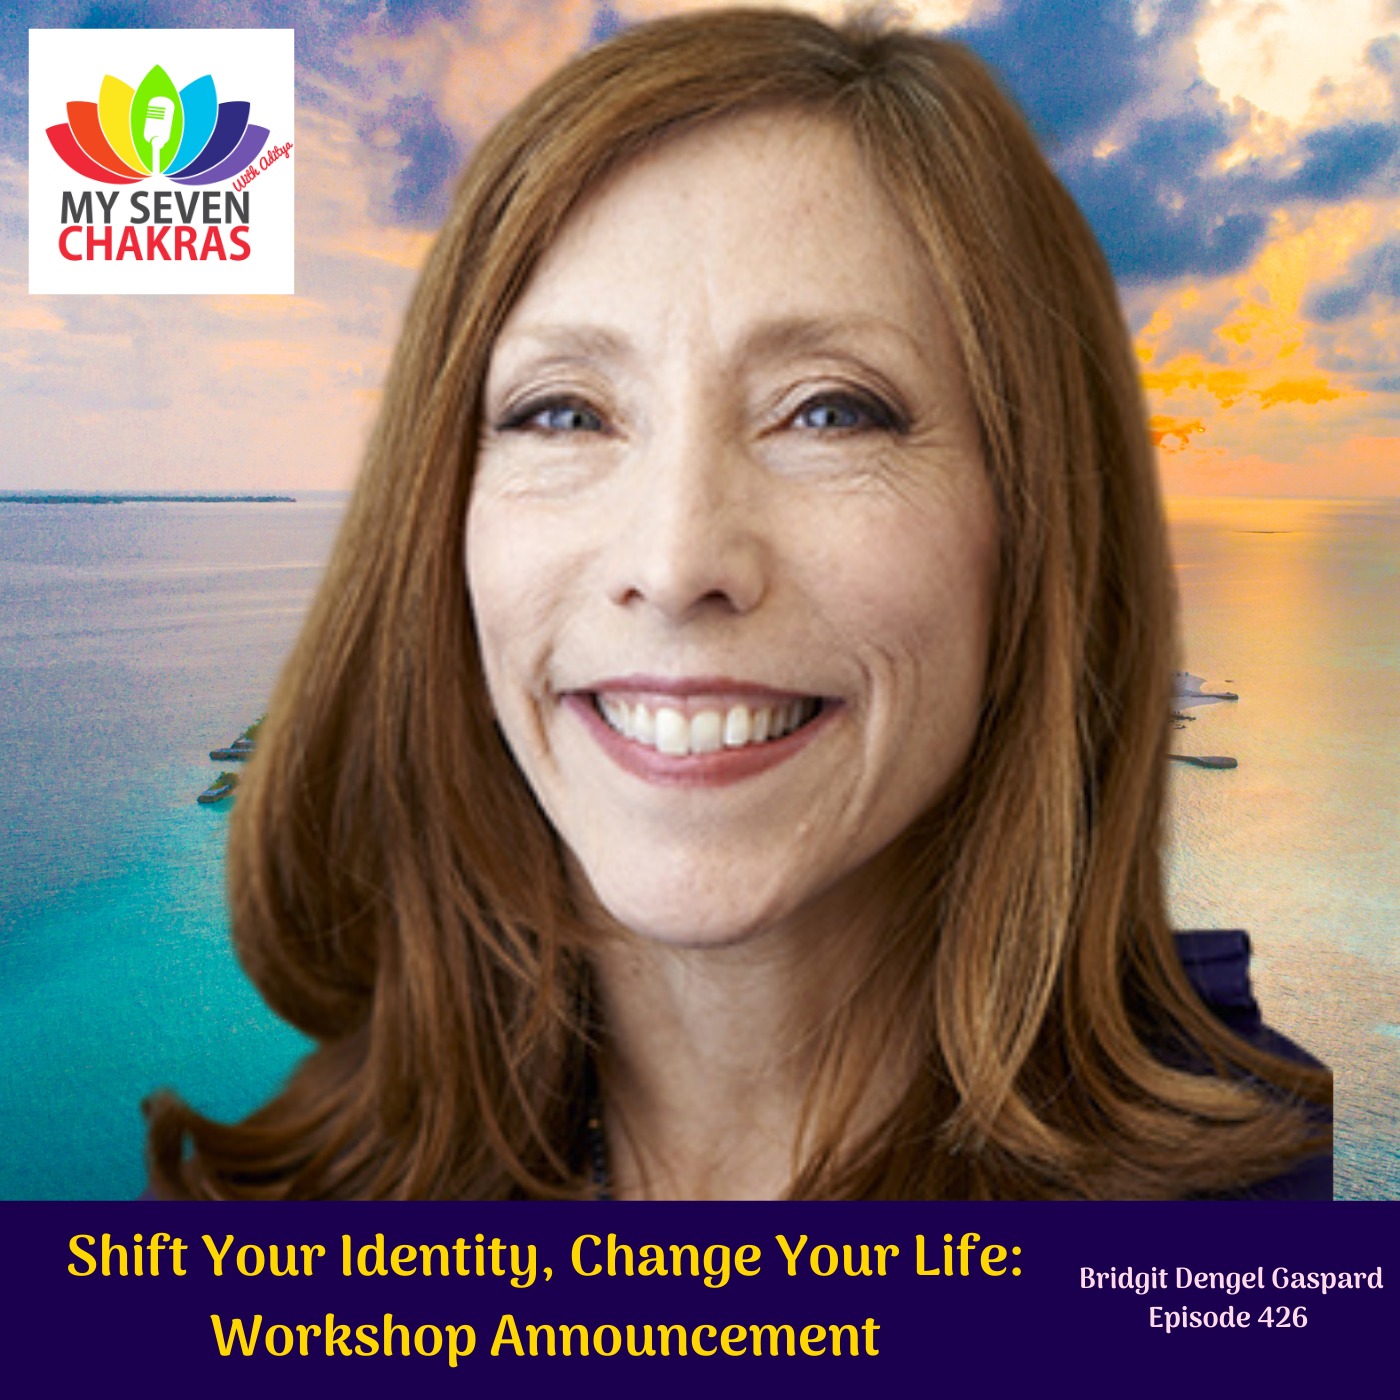 Shift Your Identity, Change Your Life: Live Workshop Announcement